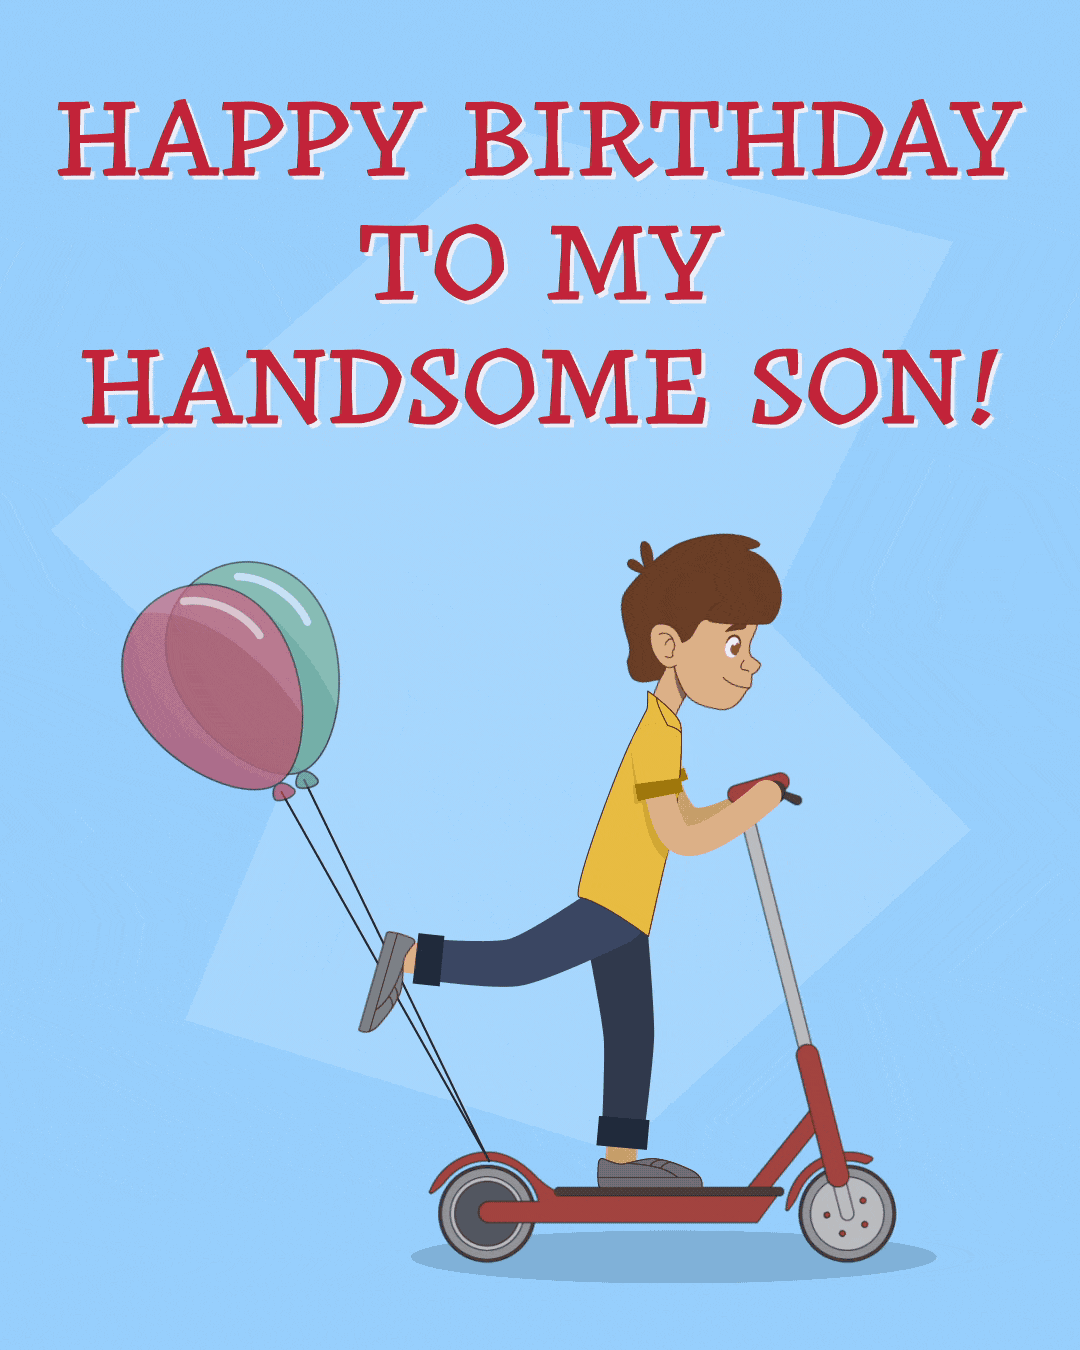 Free Happy Birthday Animated Images and GIFs for Son | Birthdayyou.com